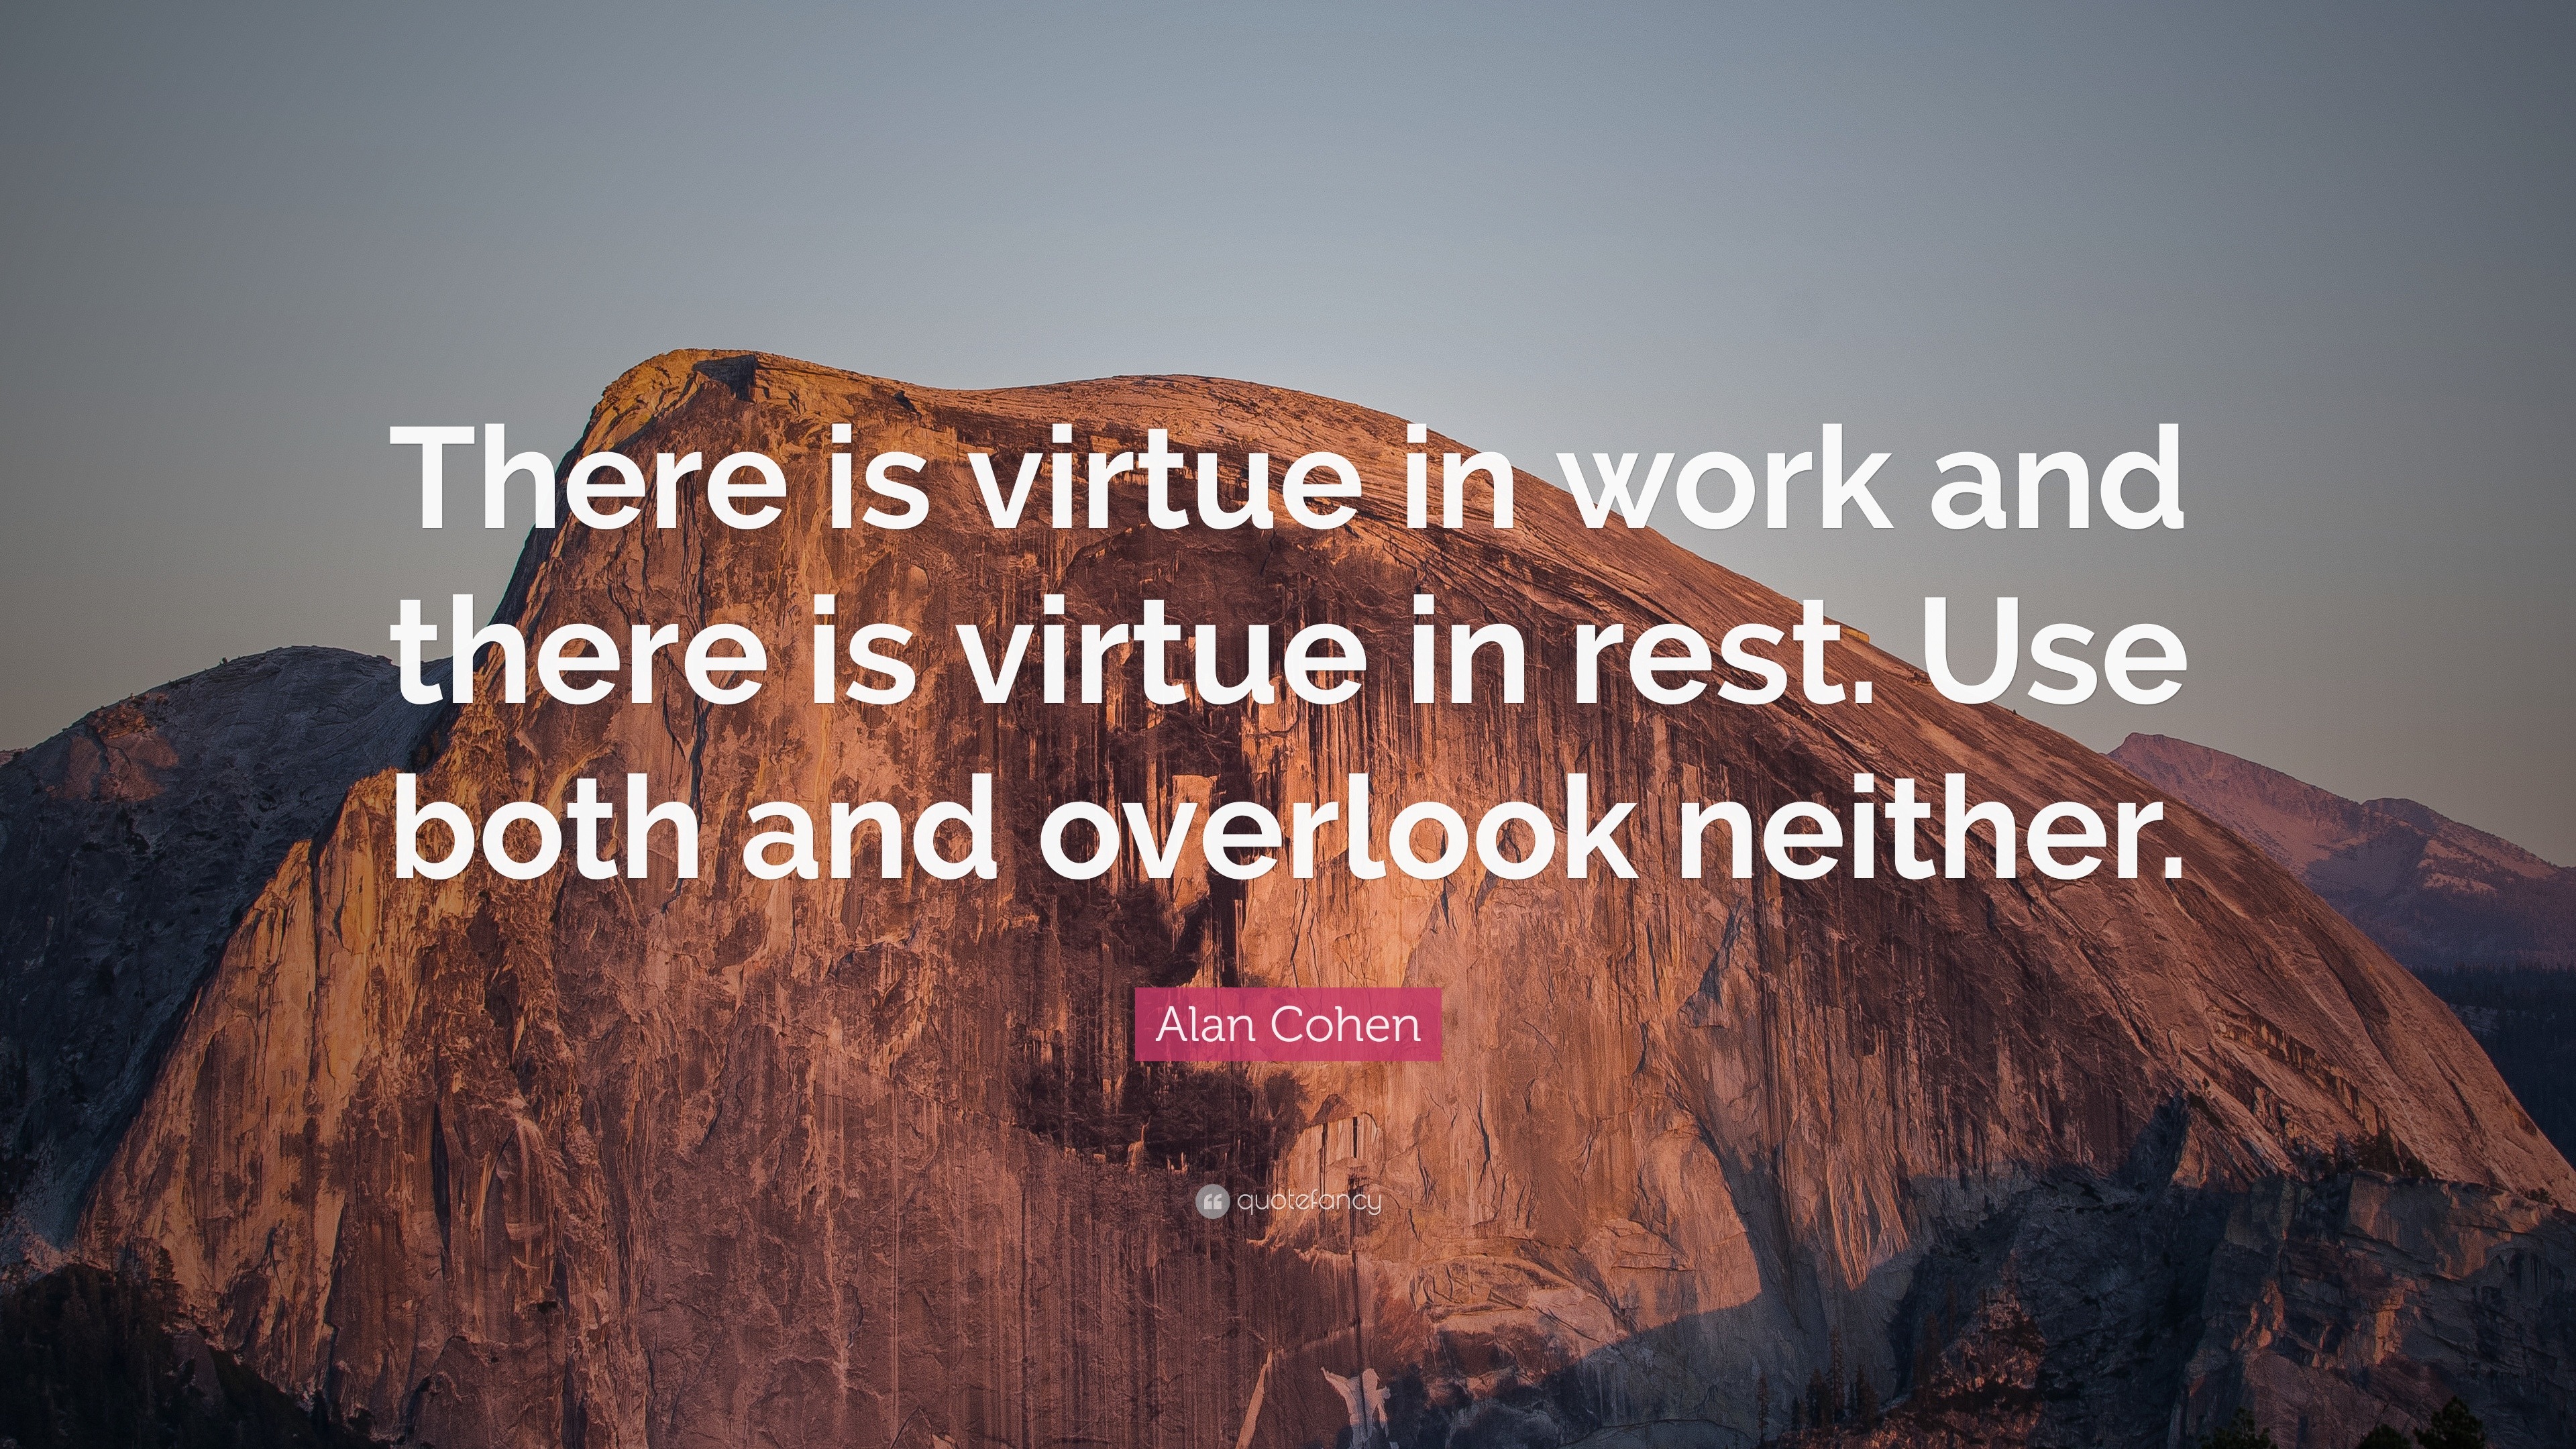 Alan Cohen Quote: “There is virtue in work and there is virtue in rest